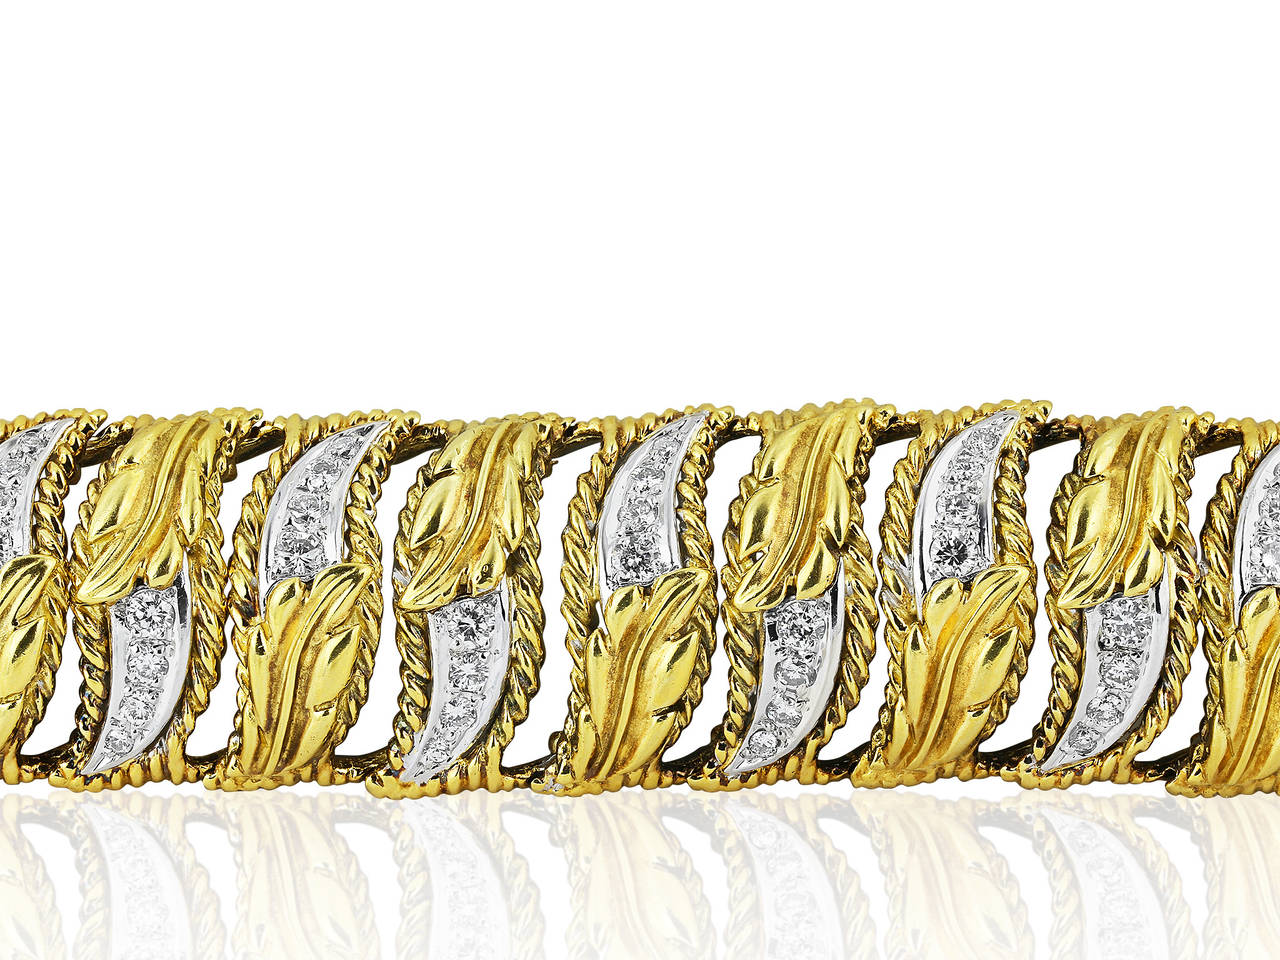 18 karat yellow gold flexible bracelet consisting of 88 round brilliant cut diamonds having a total weight of approximately 3.75 carats accenting a leaf pattern.